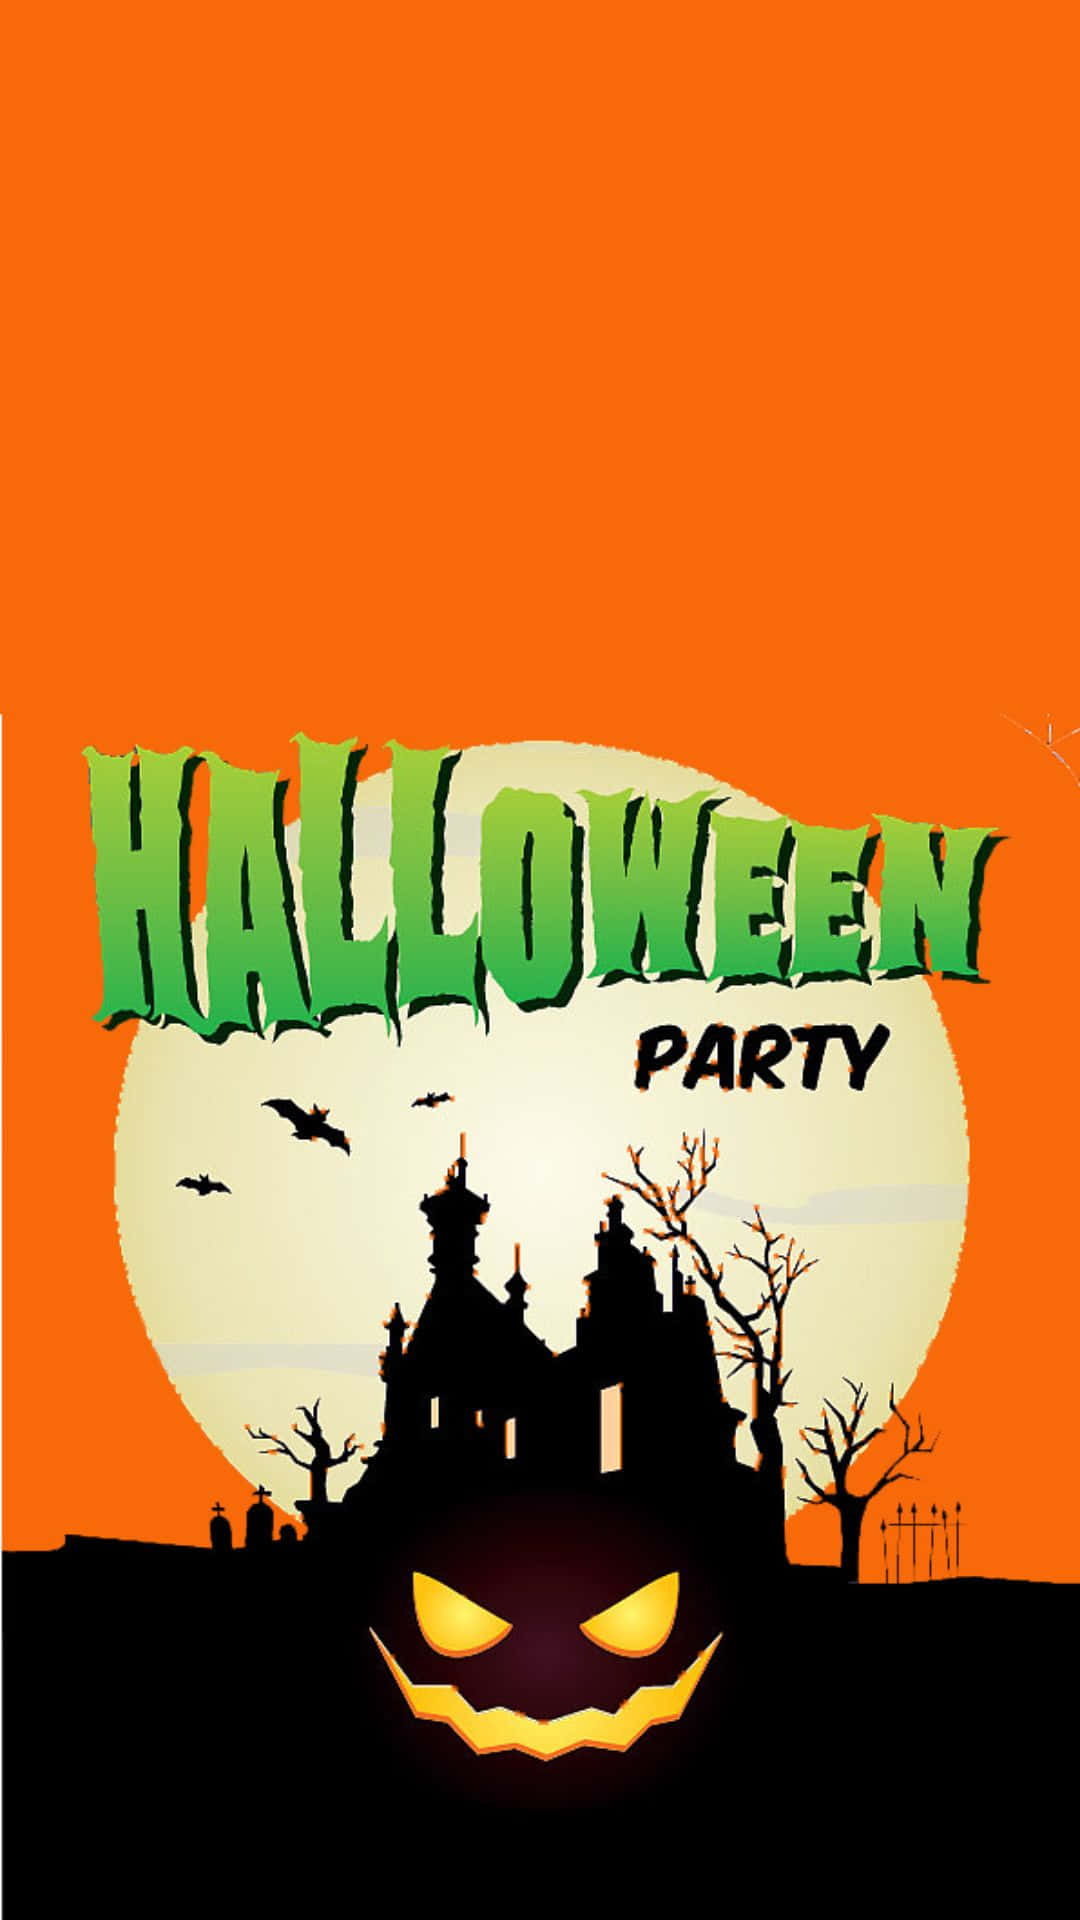 Halloween Party Banner With A Scary Face